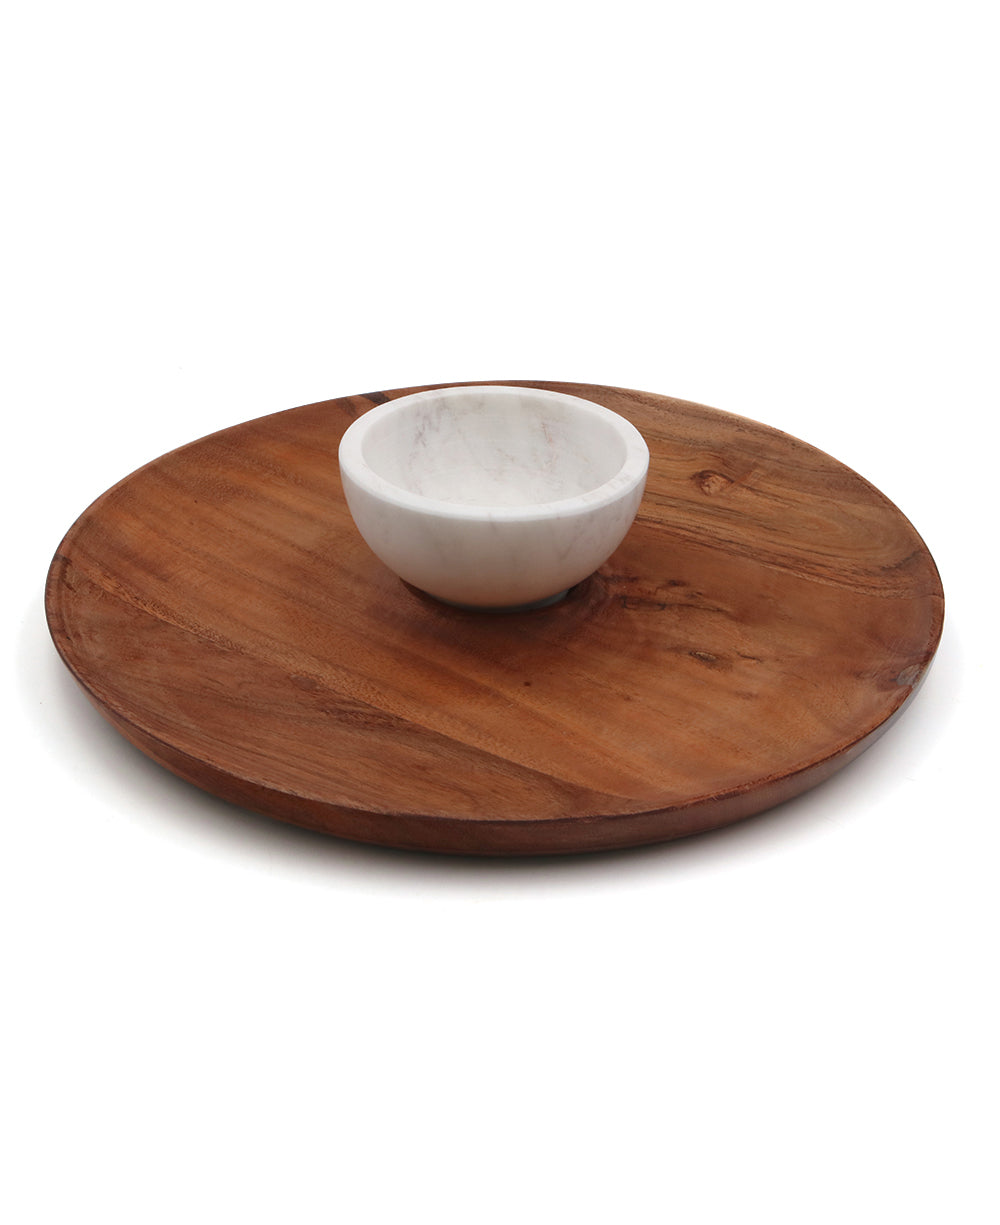 Marble and Wood Serving Set